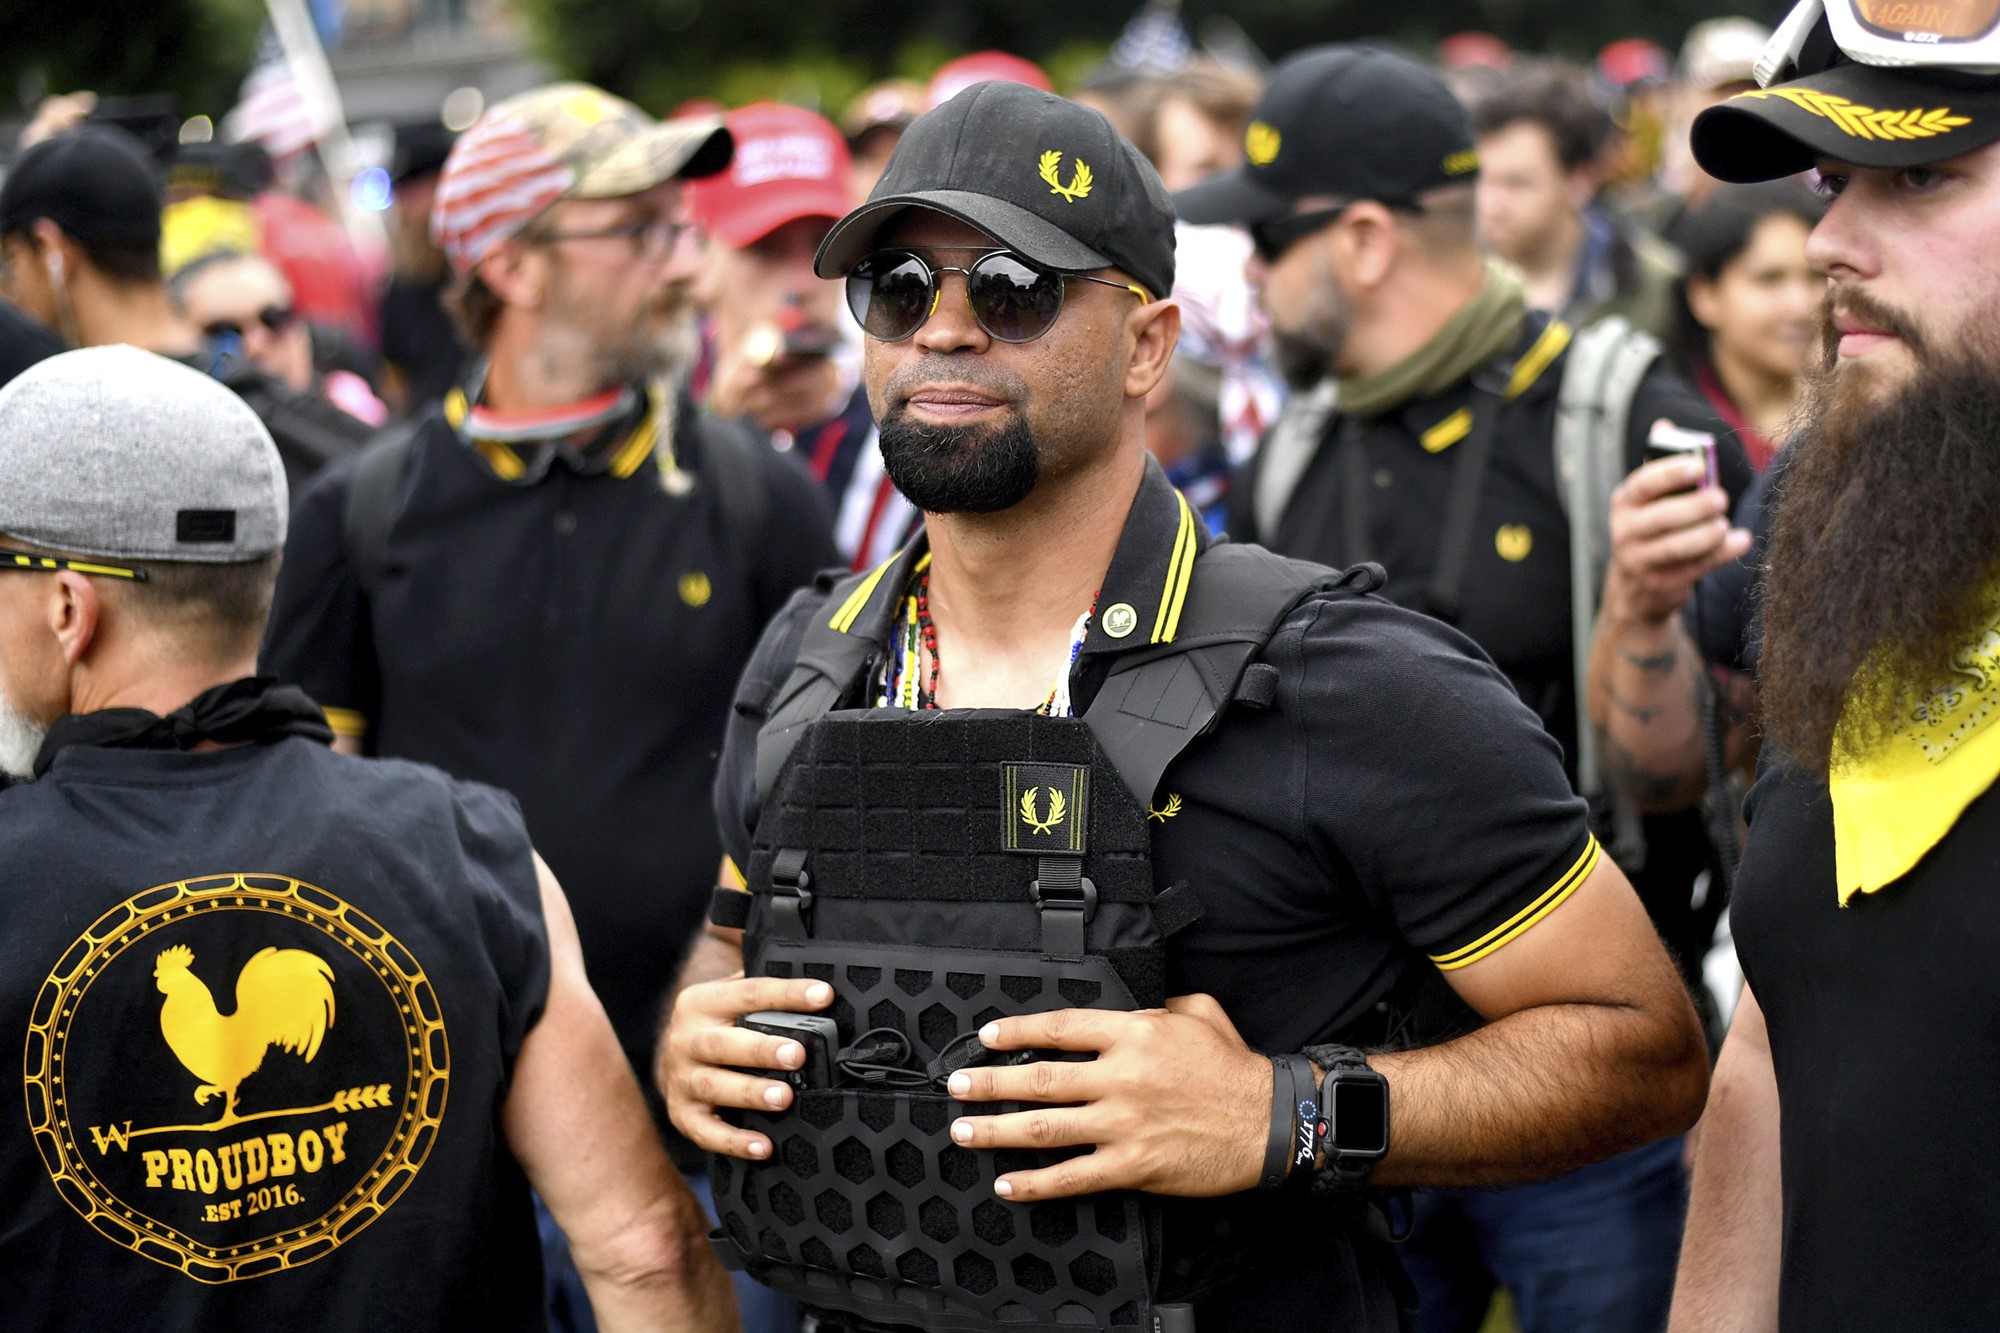 Enrique stands with other Proud Boys dressed in black and yellow.